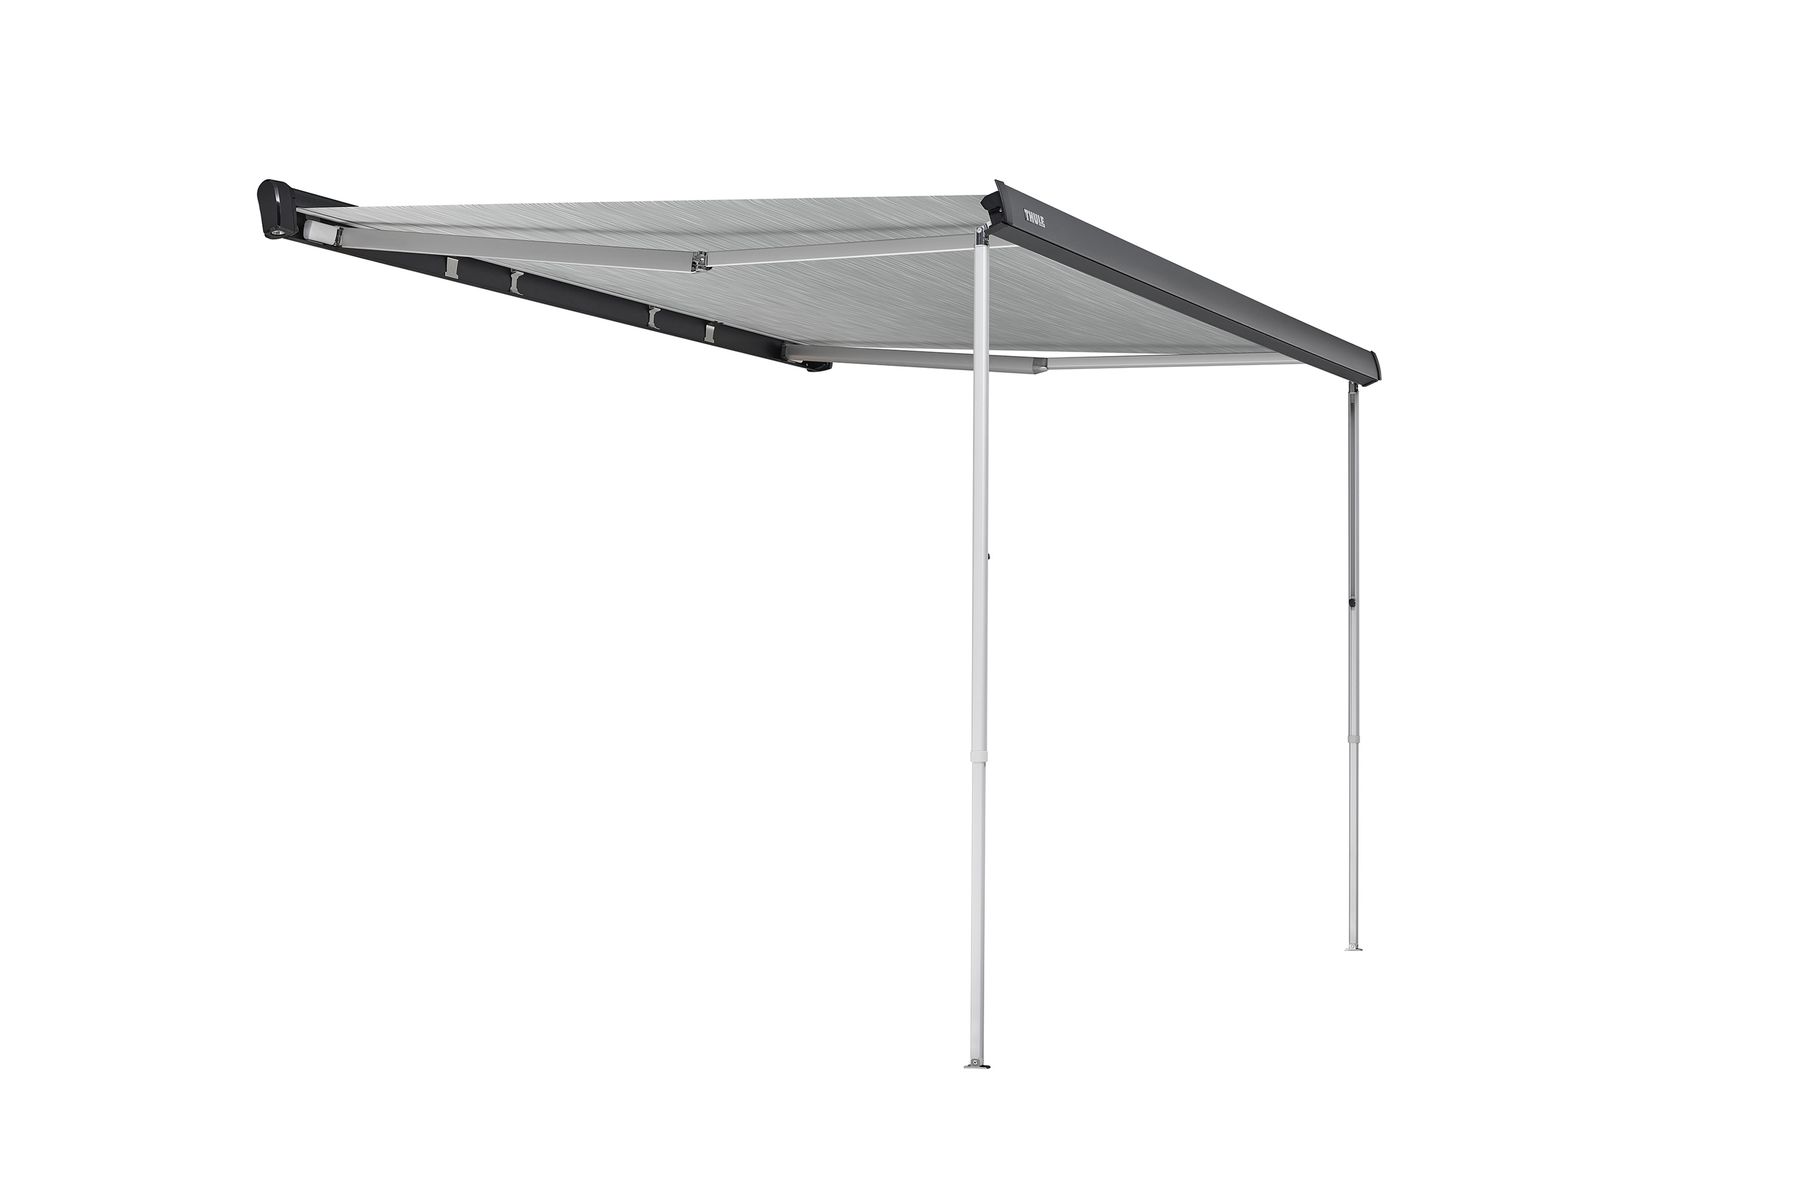 Thule 4200 awning Van support arms